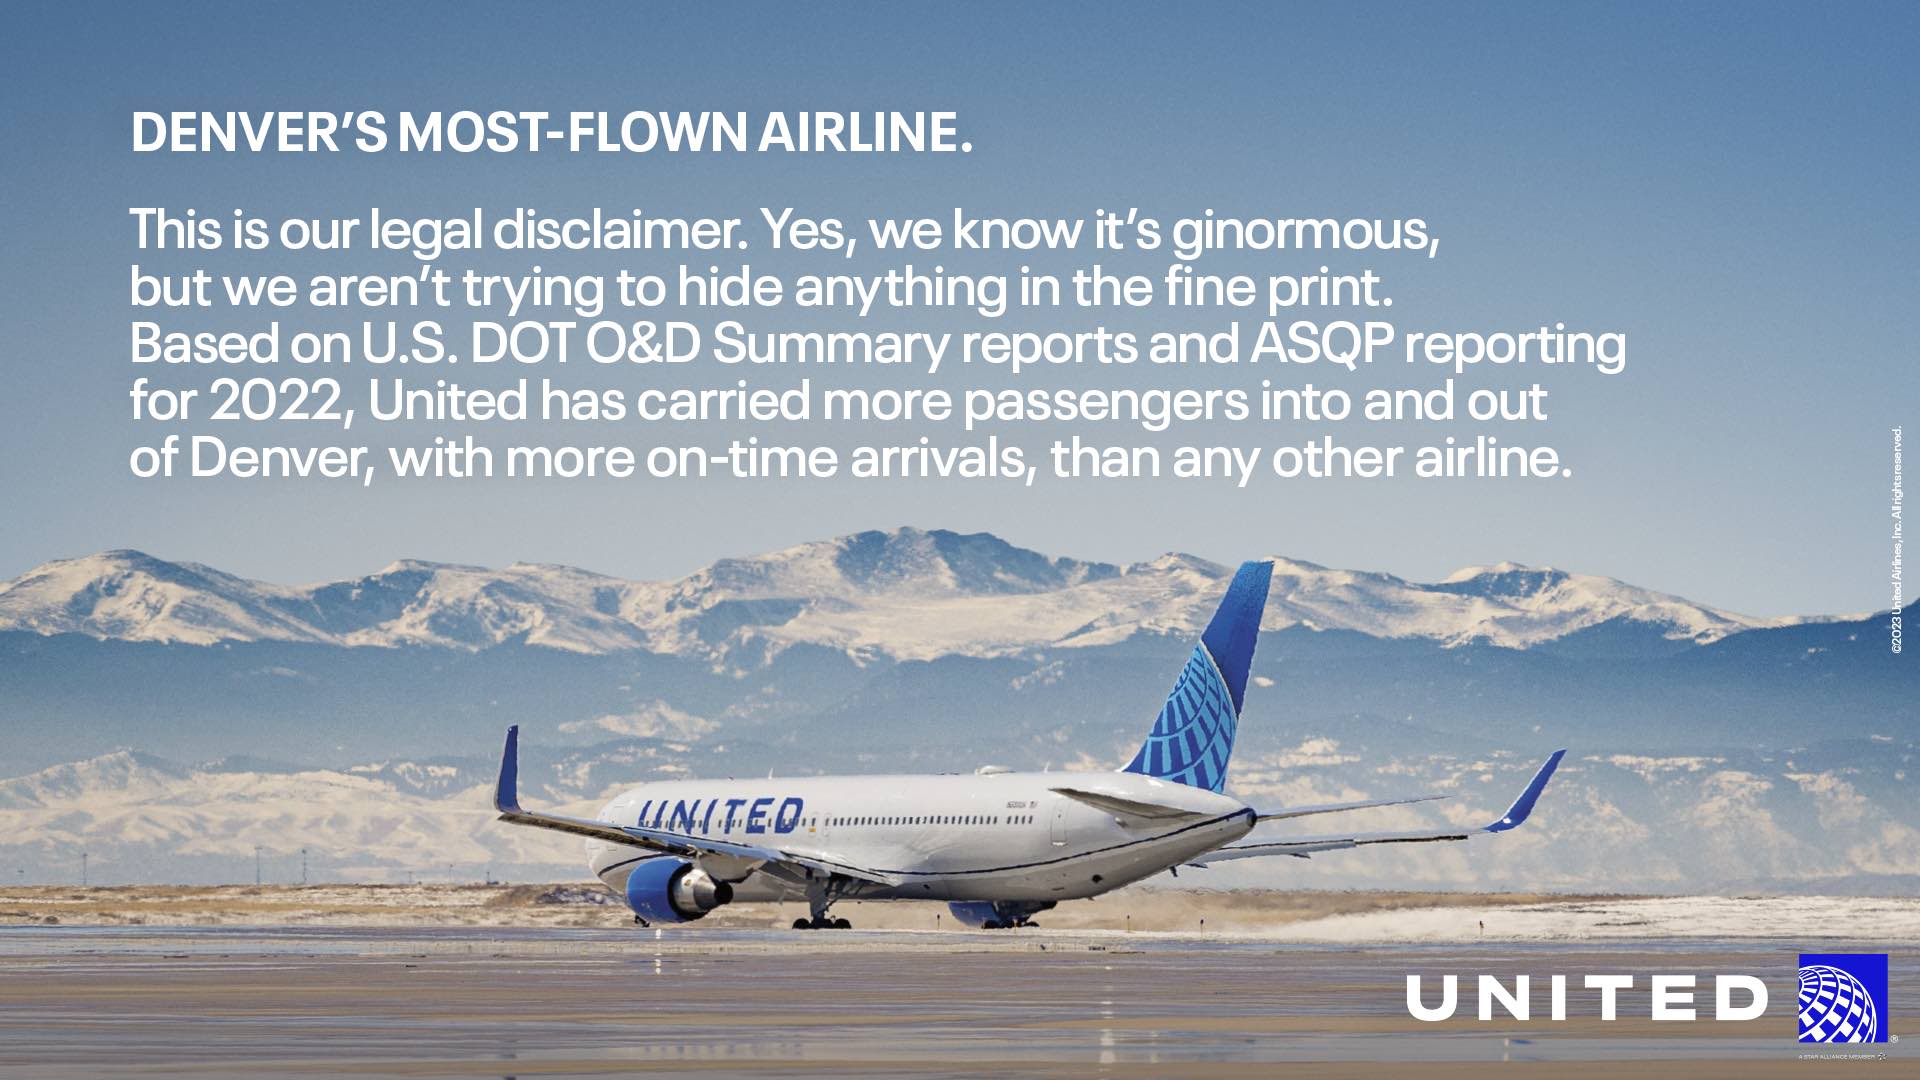 Dueling Ads From United Airlines And Southwest Airlines In Denver - Live  and Let's Fly